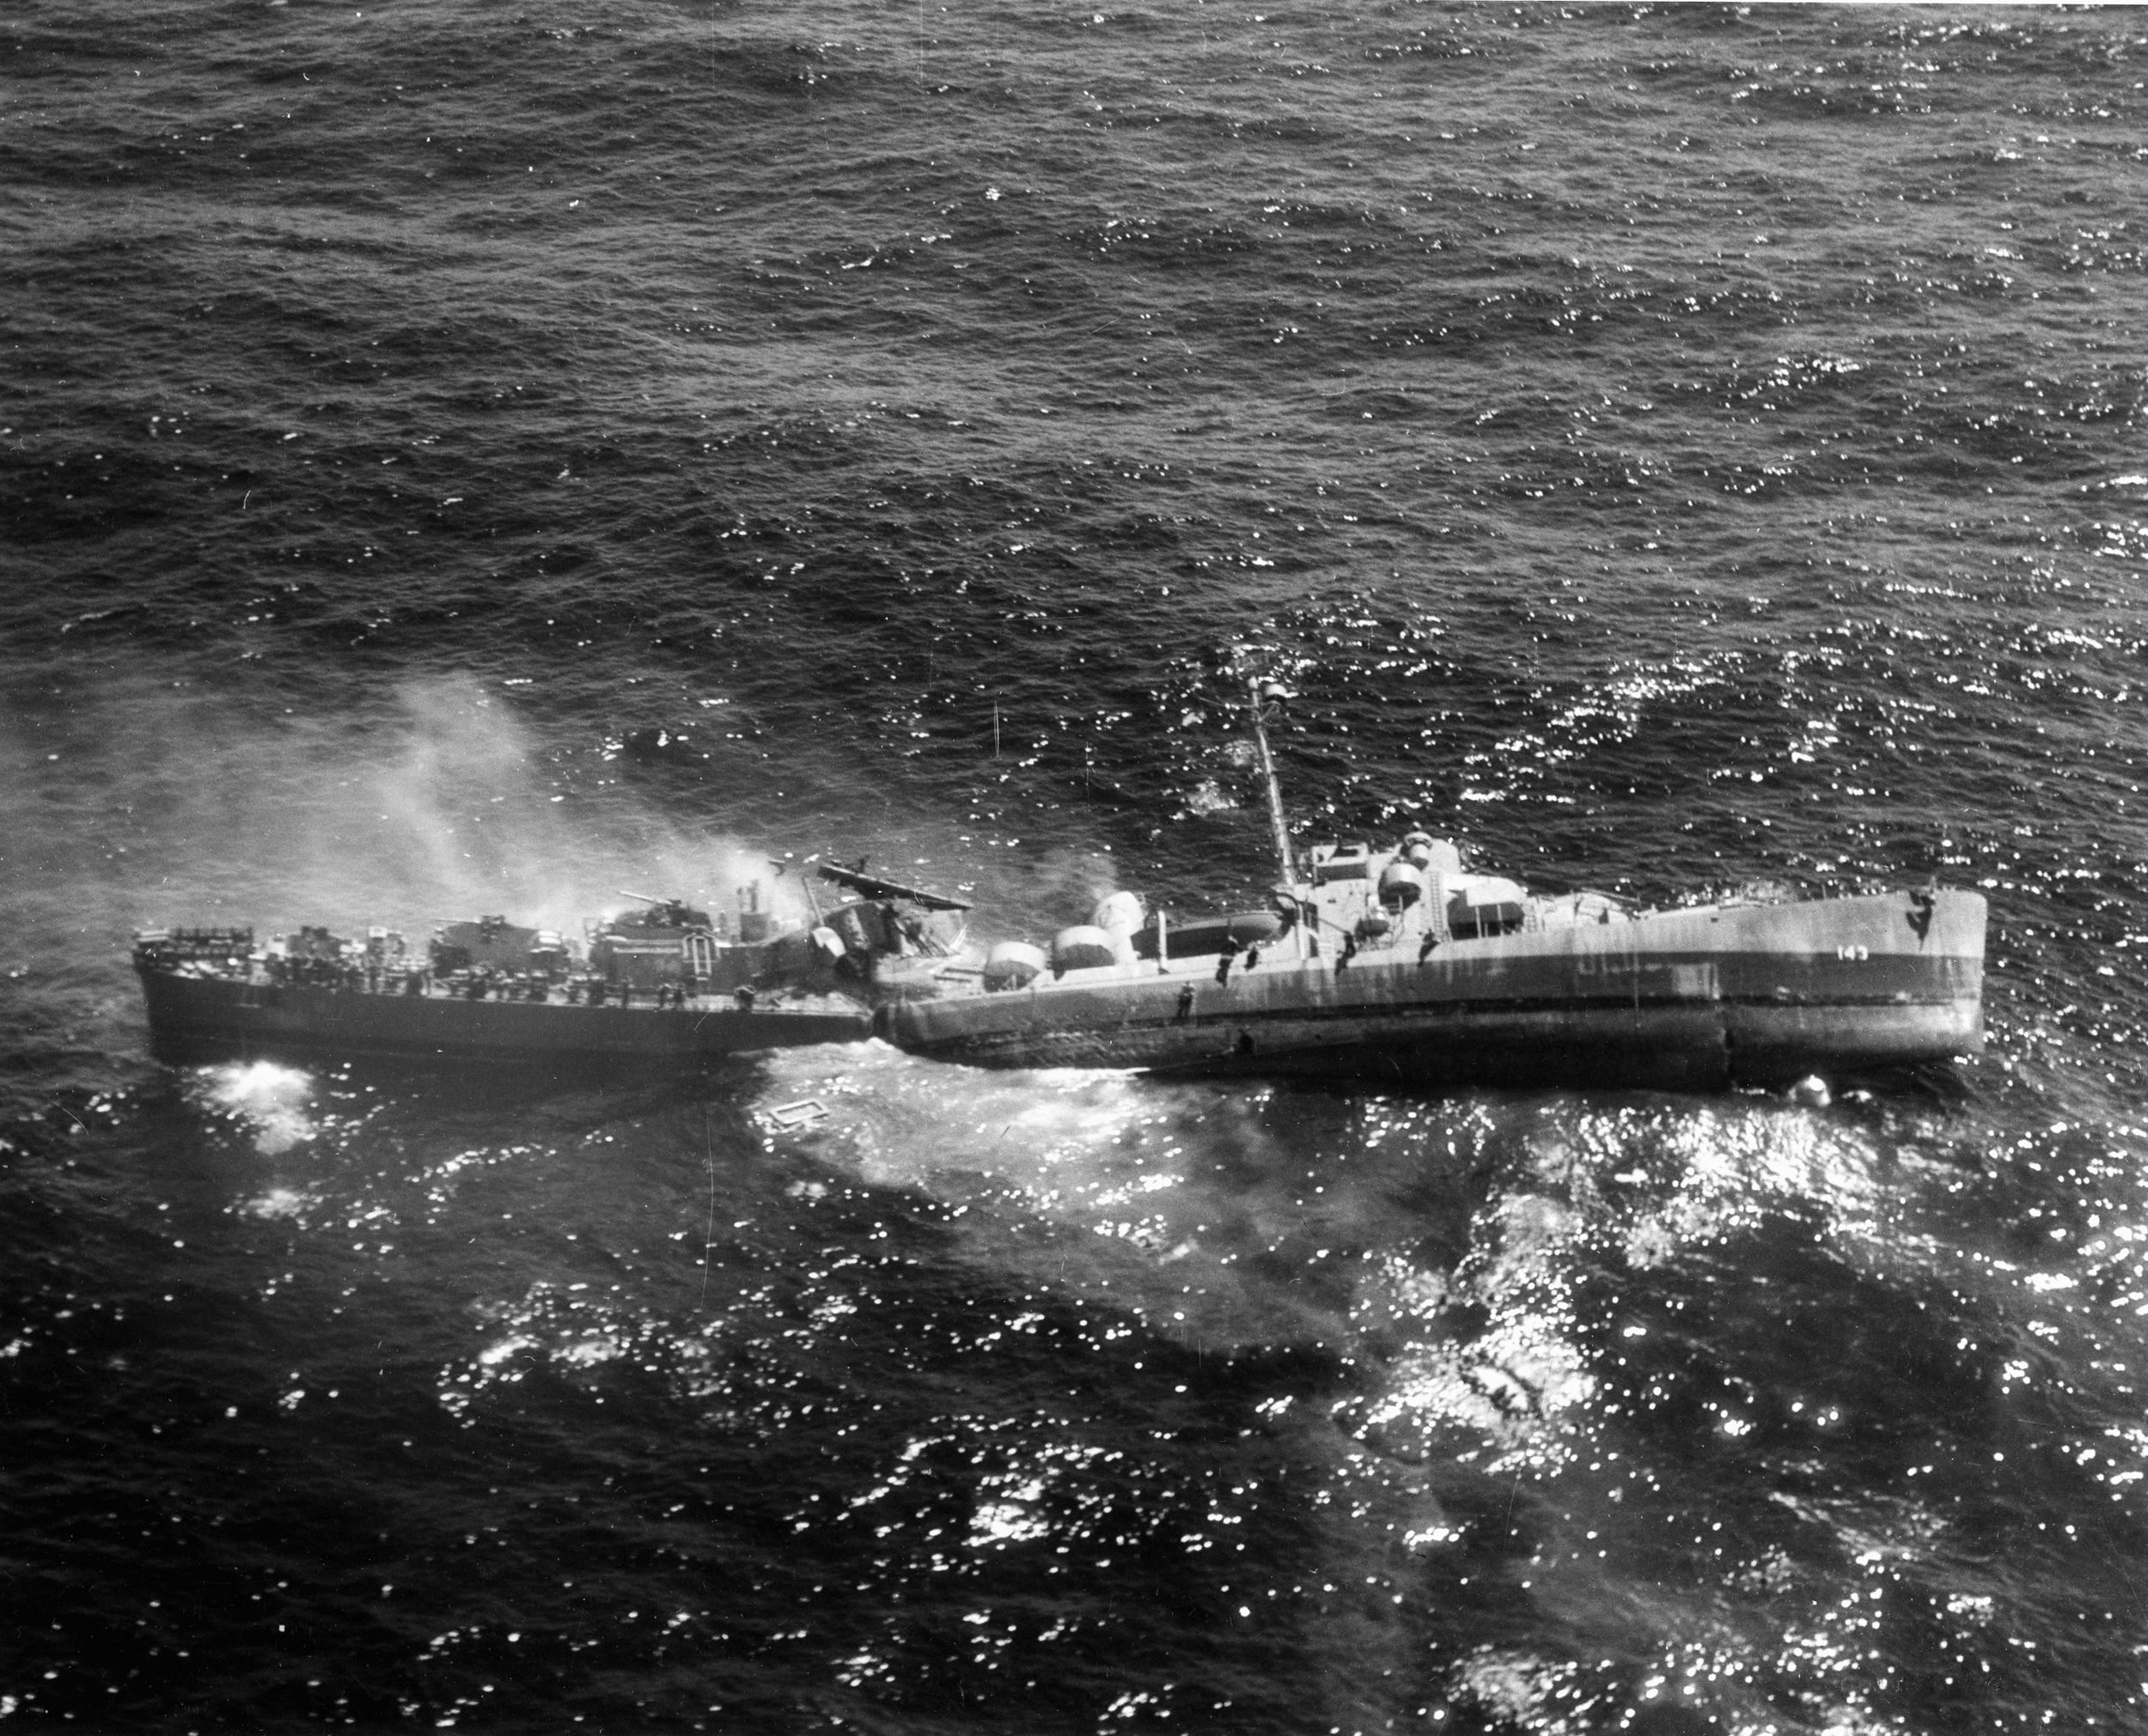 Struck fatally by a German torpedo, a U.S. Navy destroyer escort breaks up and sinks. (United States Navy)